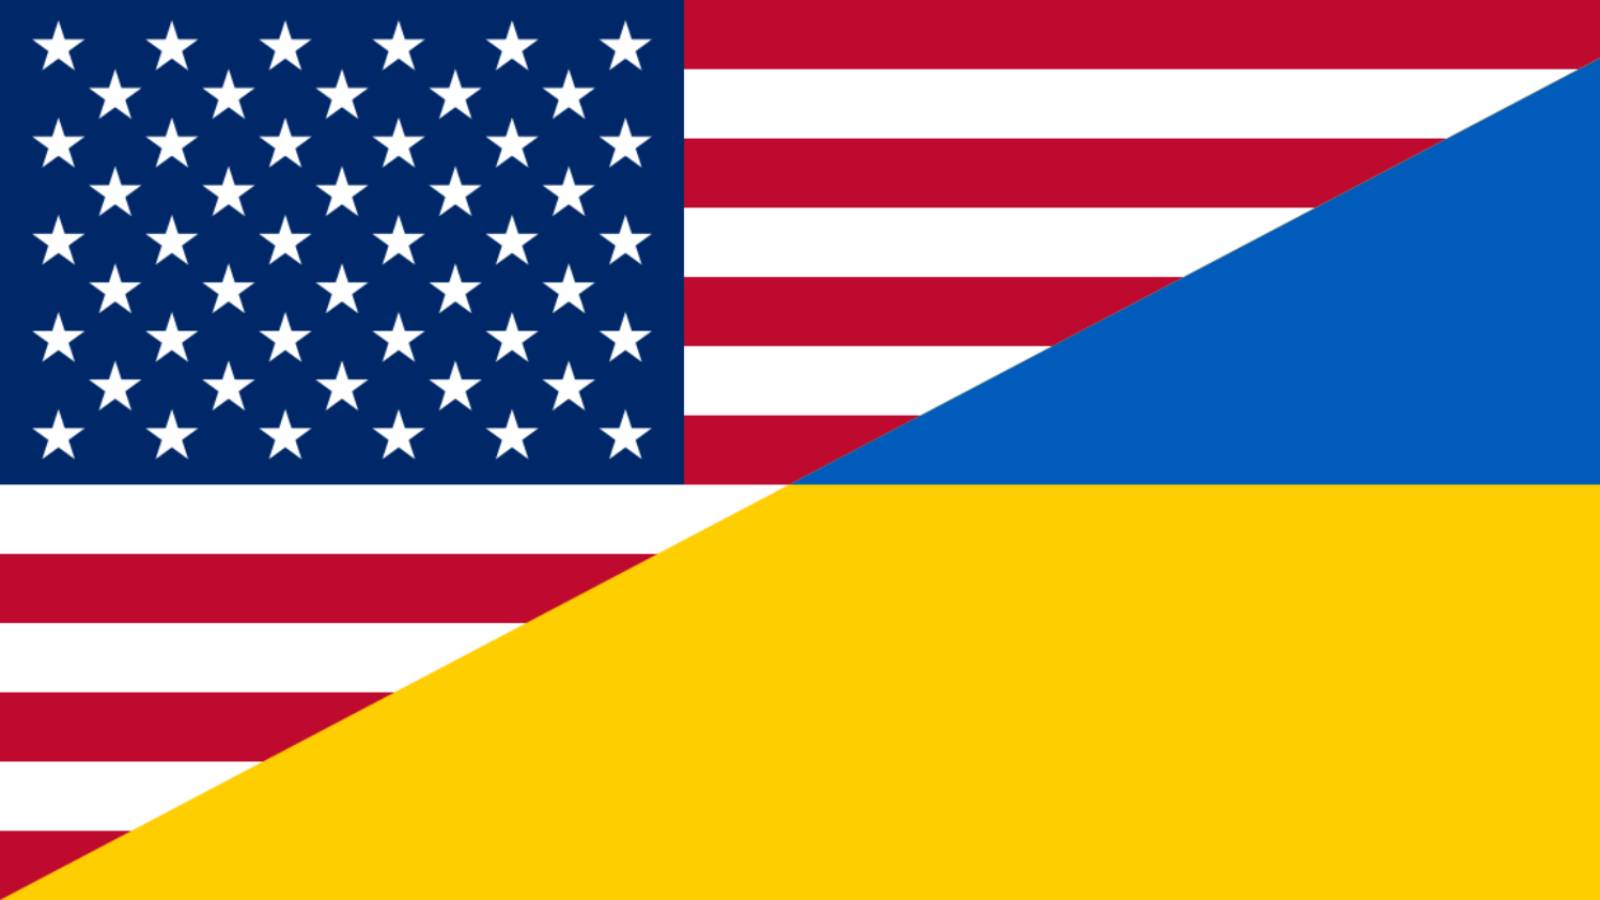 USA Delivers New Last Generation Defense Systems to Ukraine